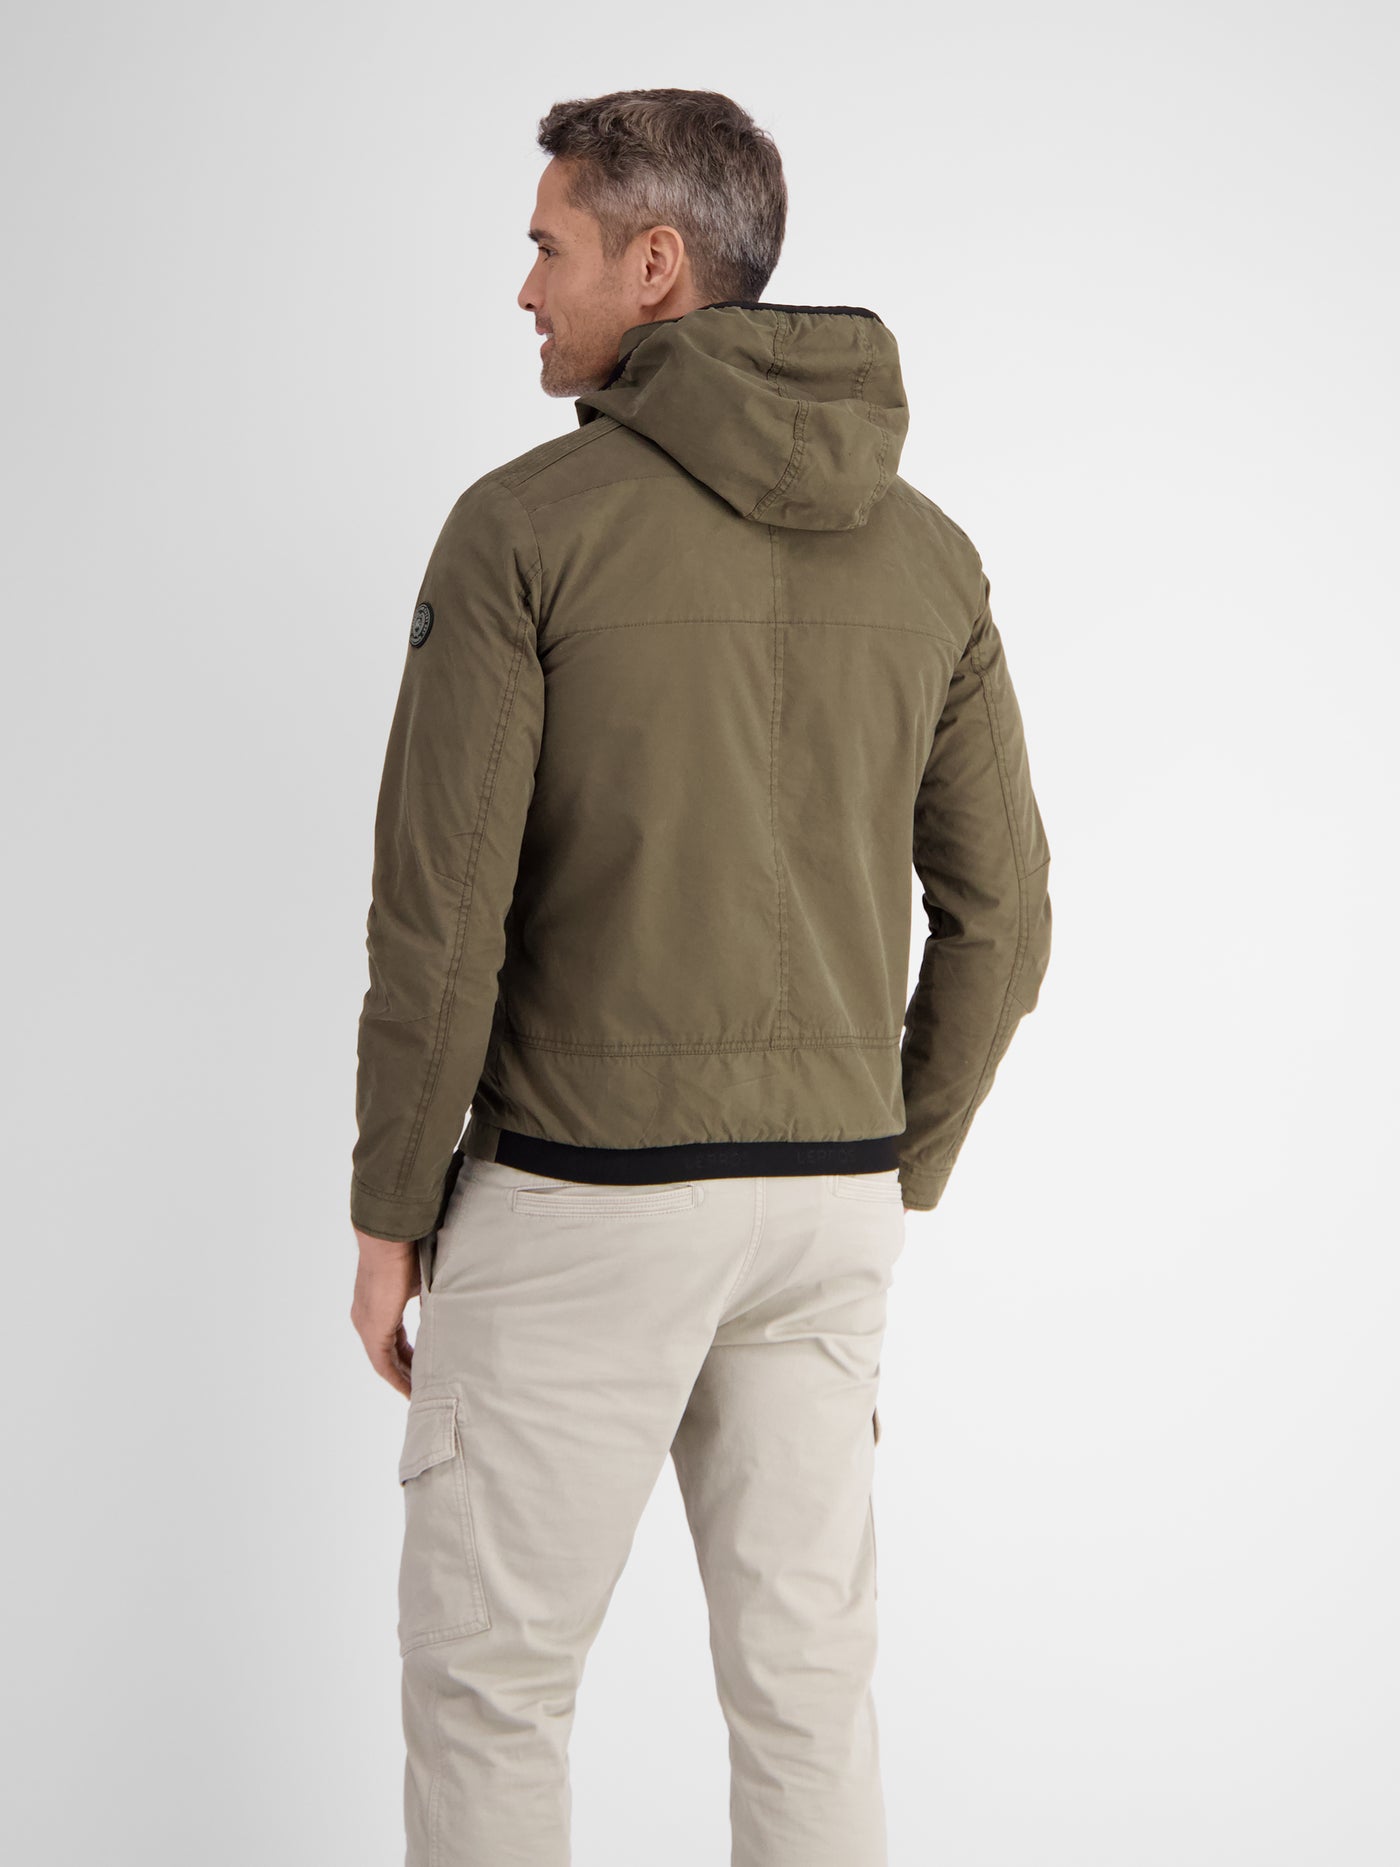 Transitional jacket, water-repellent